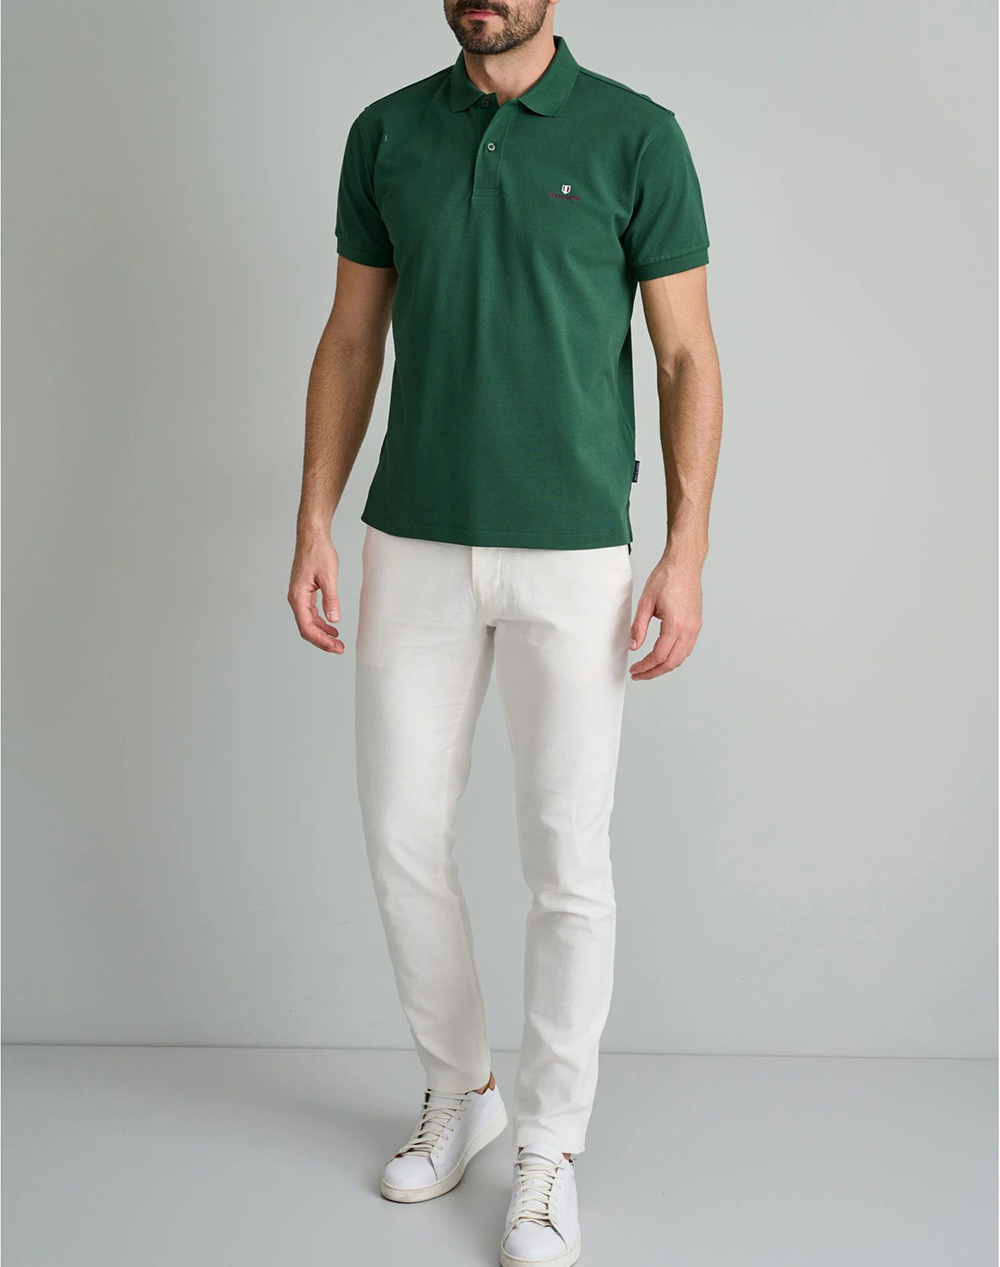 NAVY&GREEN POLO ΜΠΛΟΥΖΑΚΙ-CUSTOM FIT